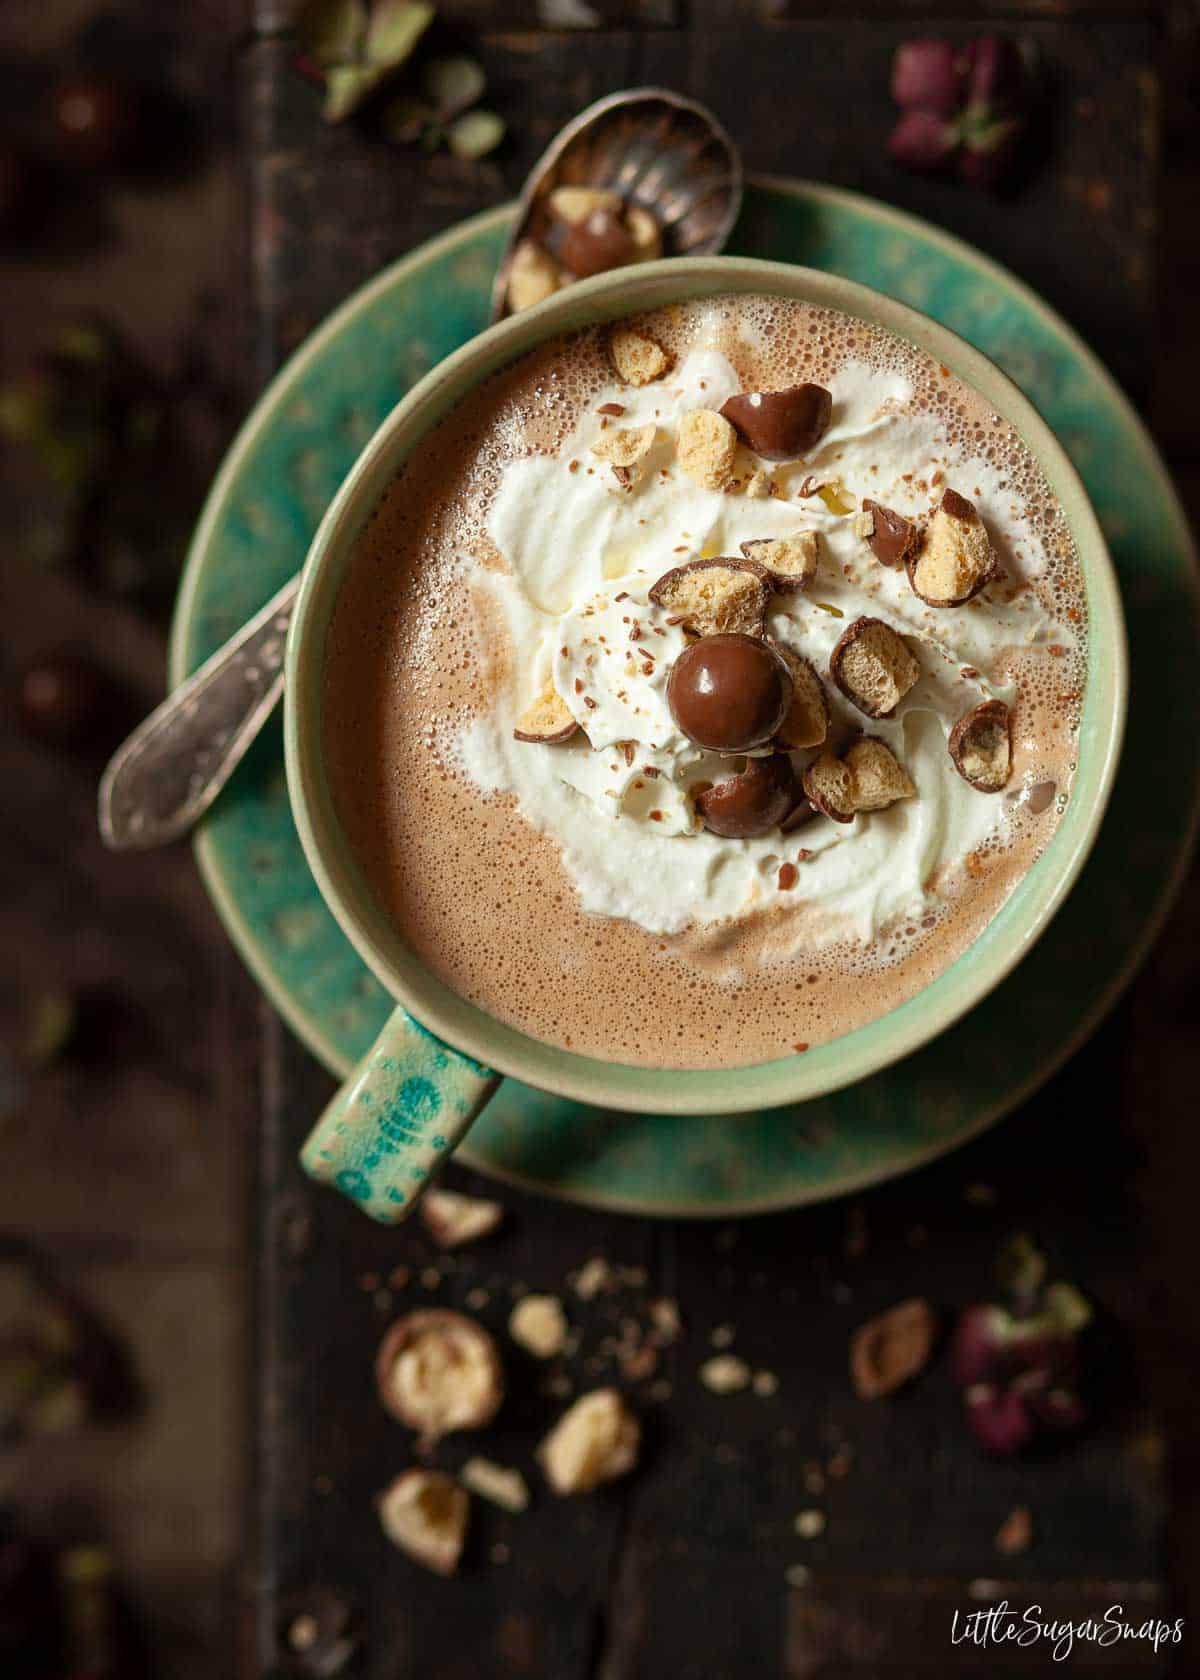 A warm chocolate drink in a blue cup topped with whipped cream and honeycomb chocolate balls.